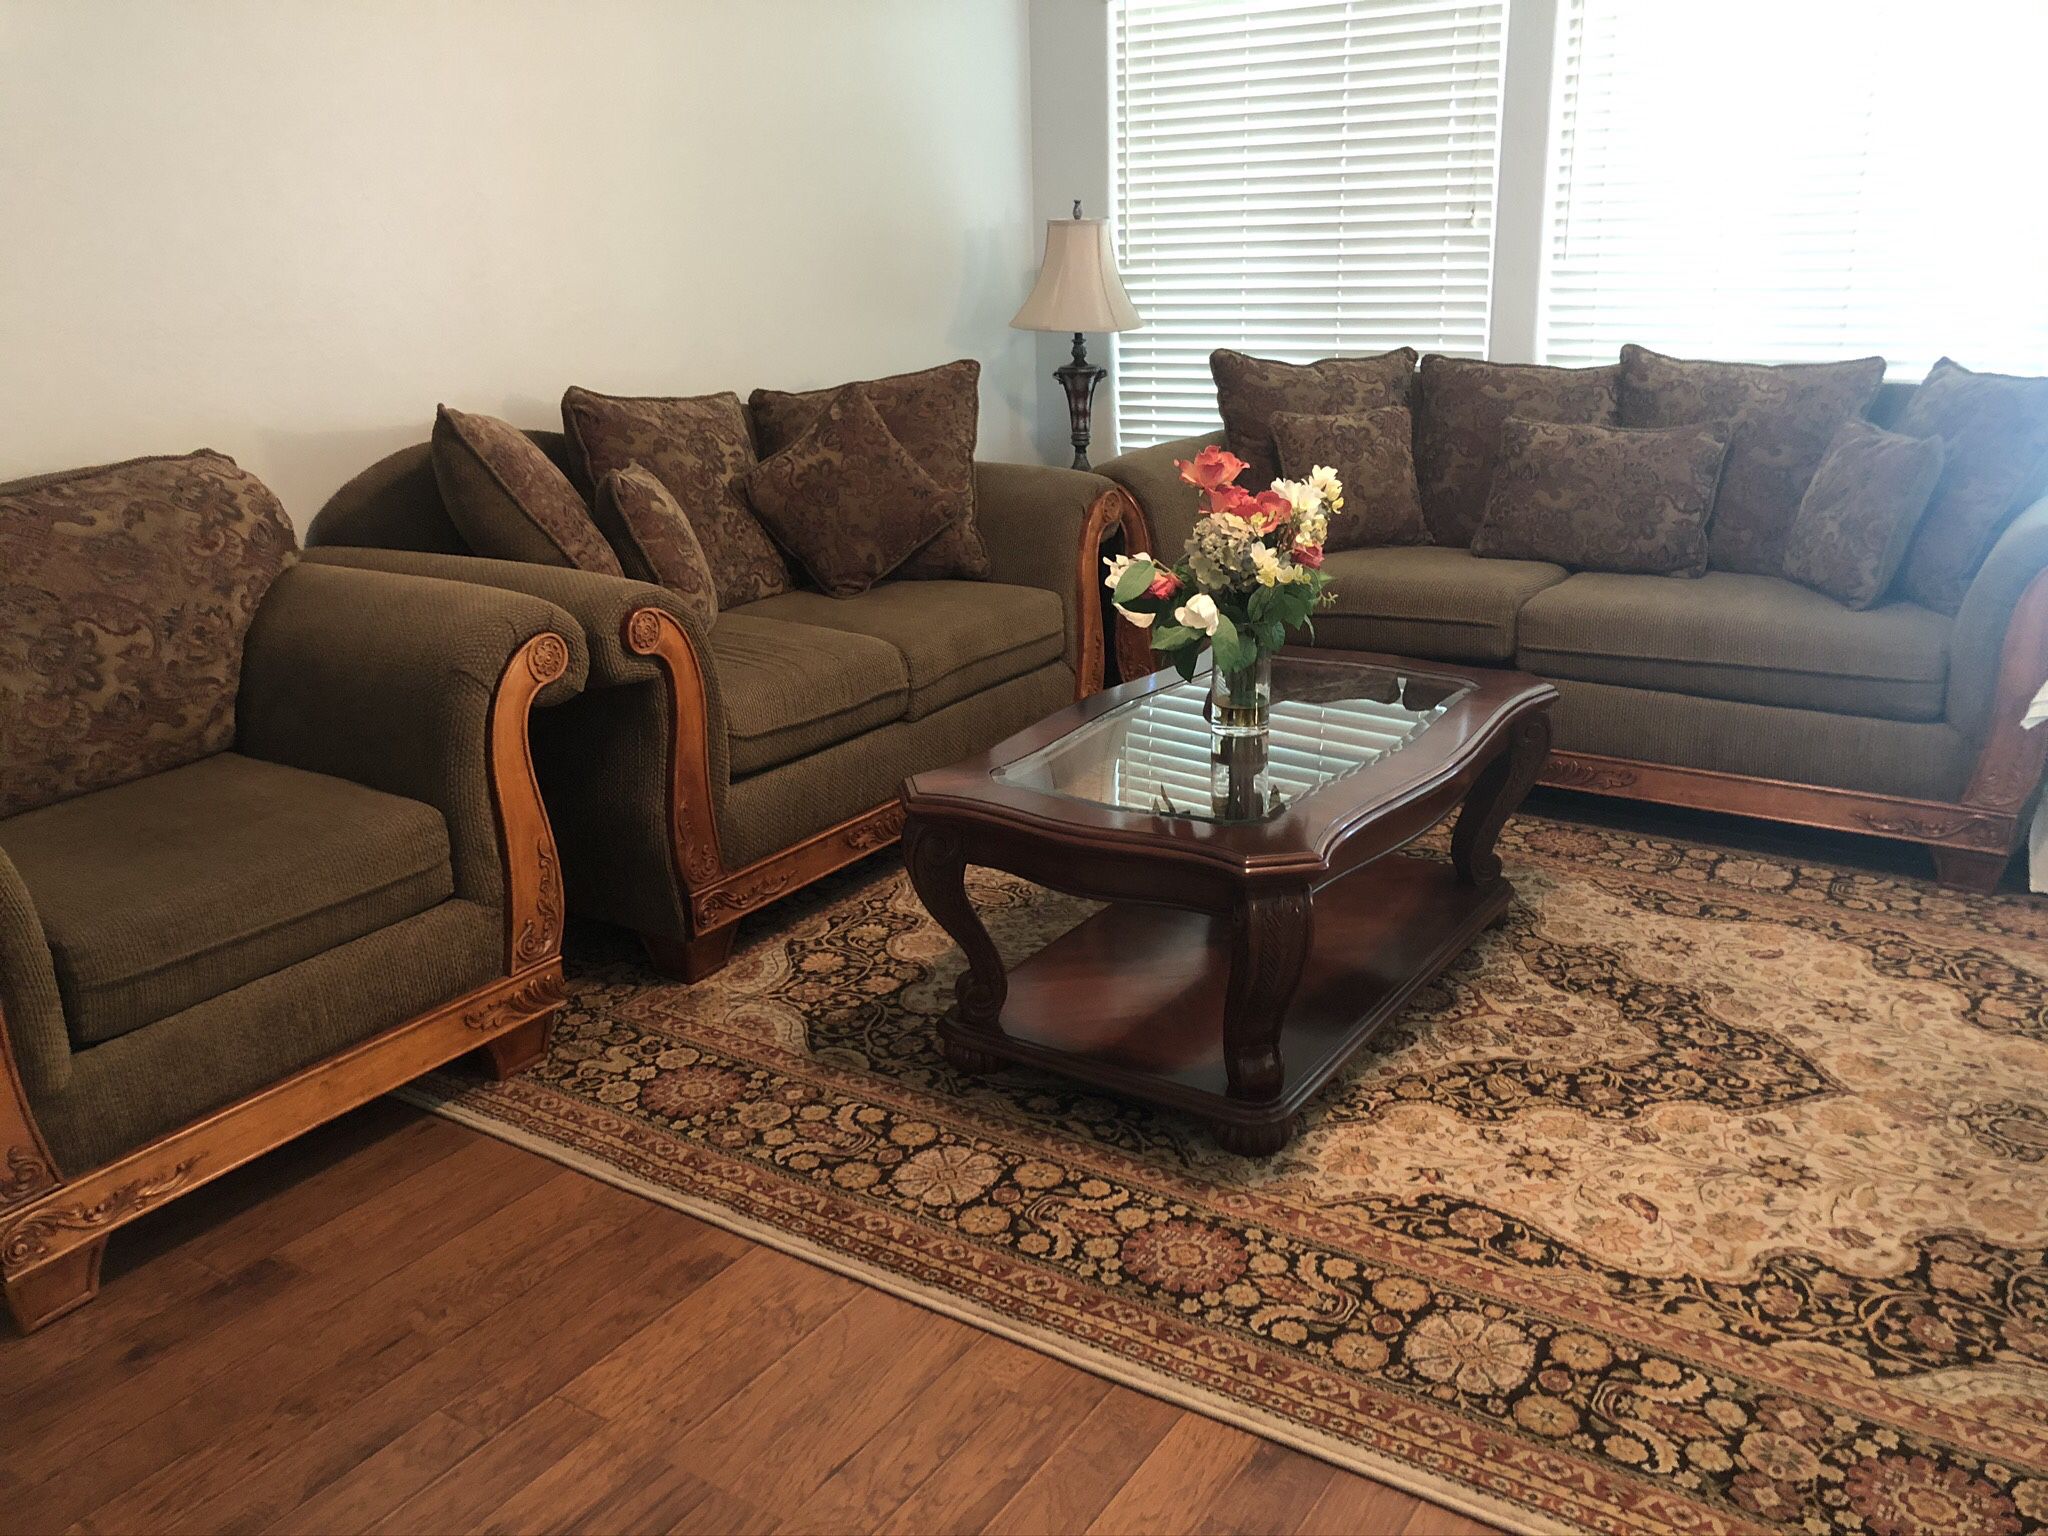 Complete Sofa Set With Tables